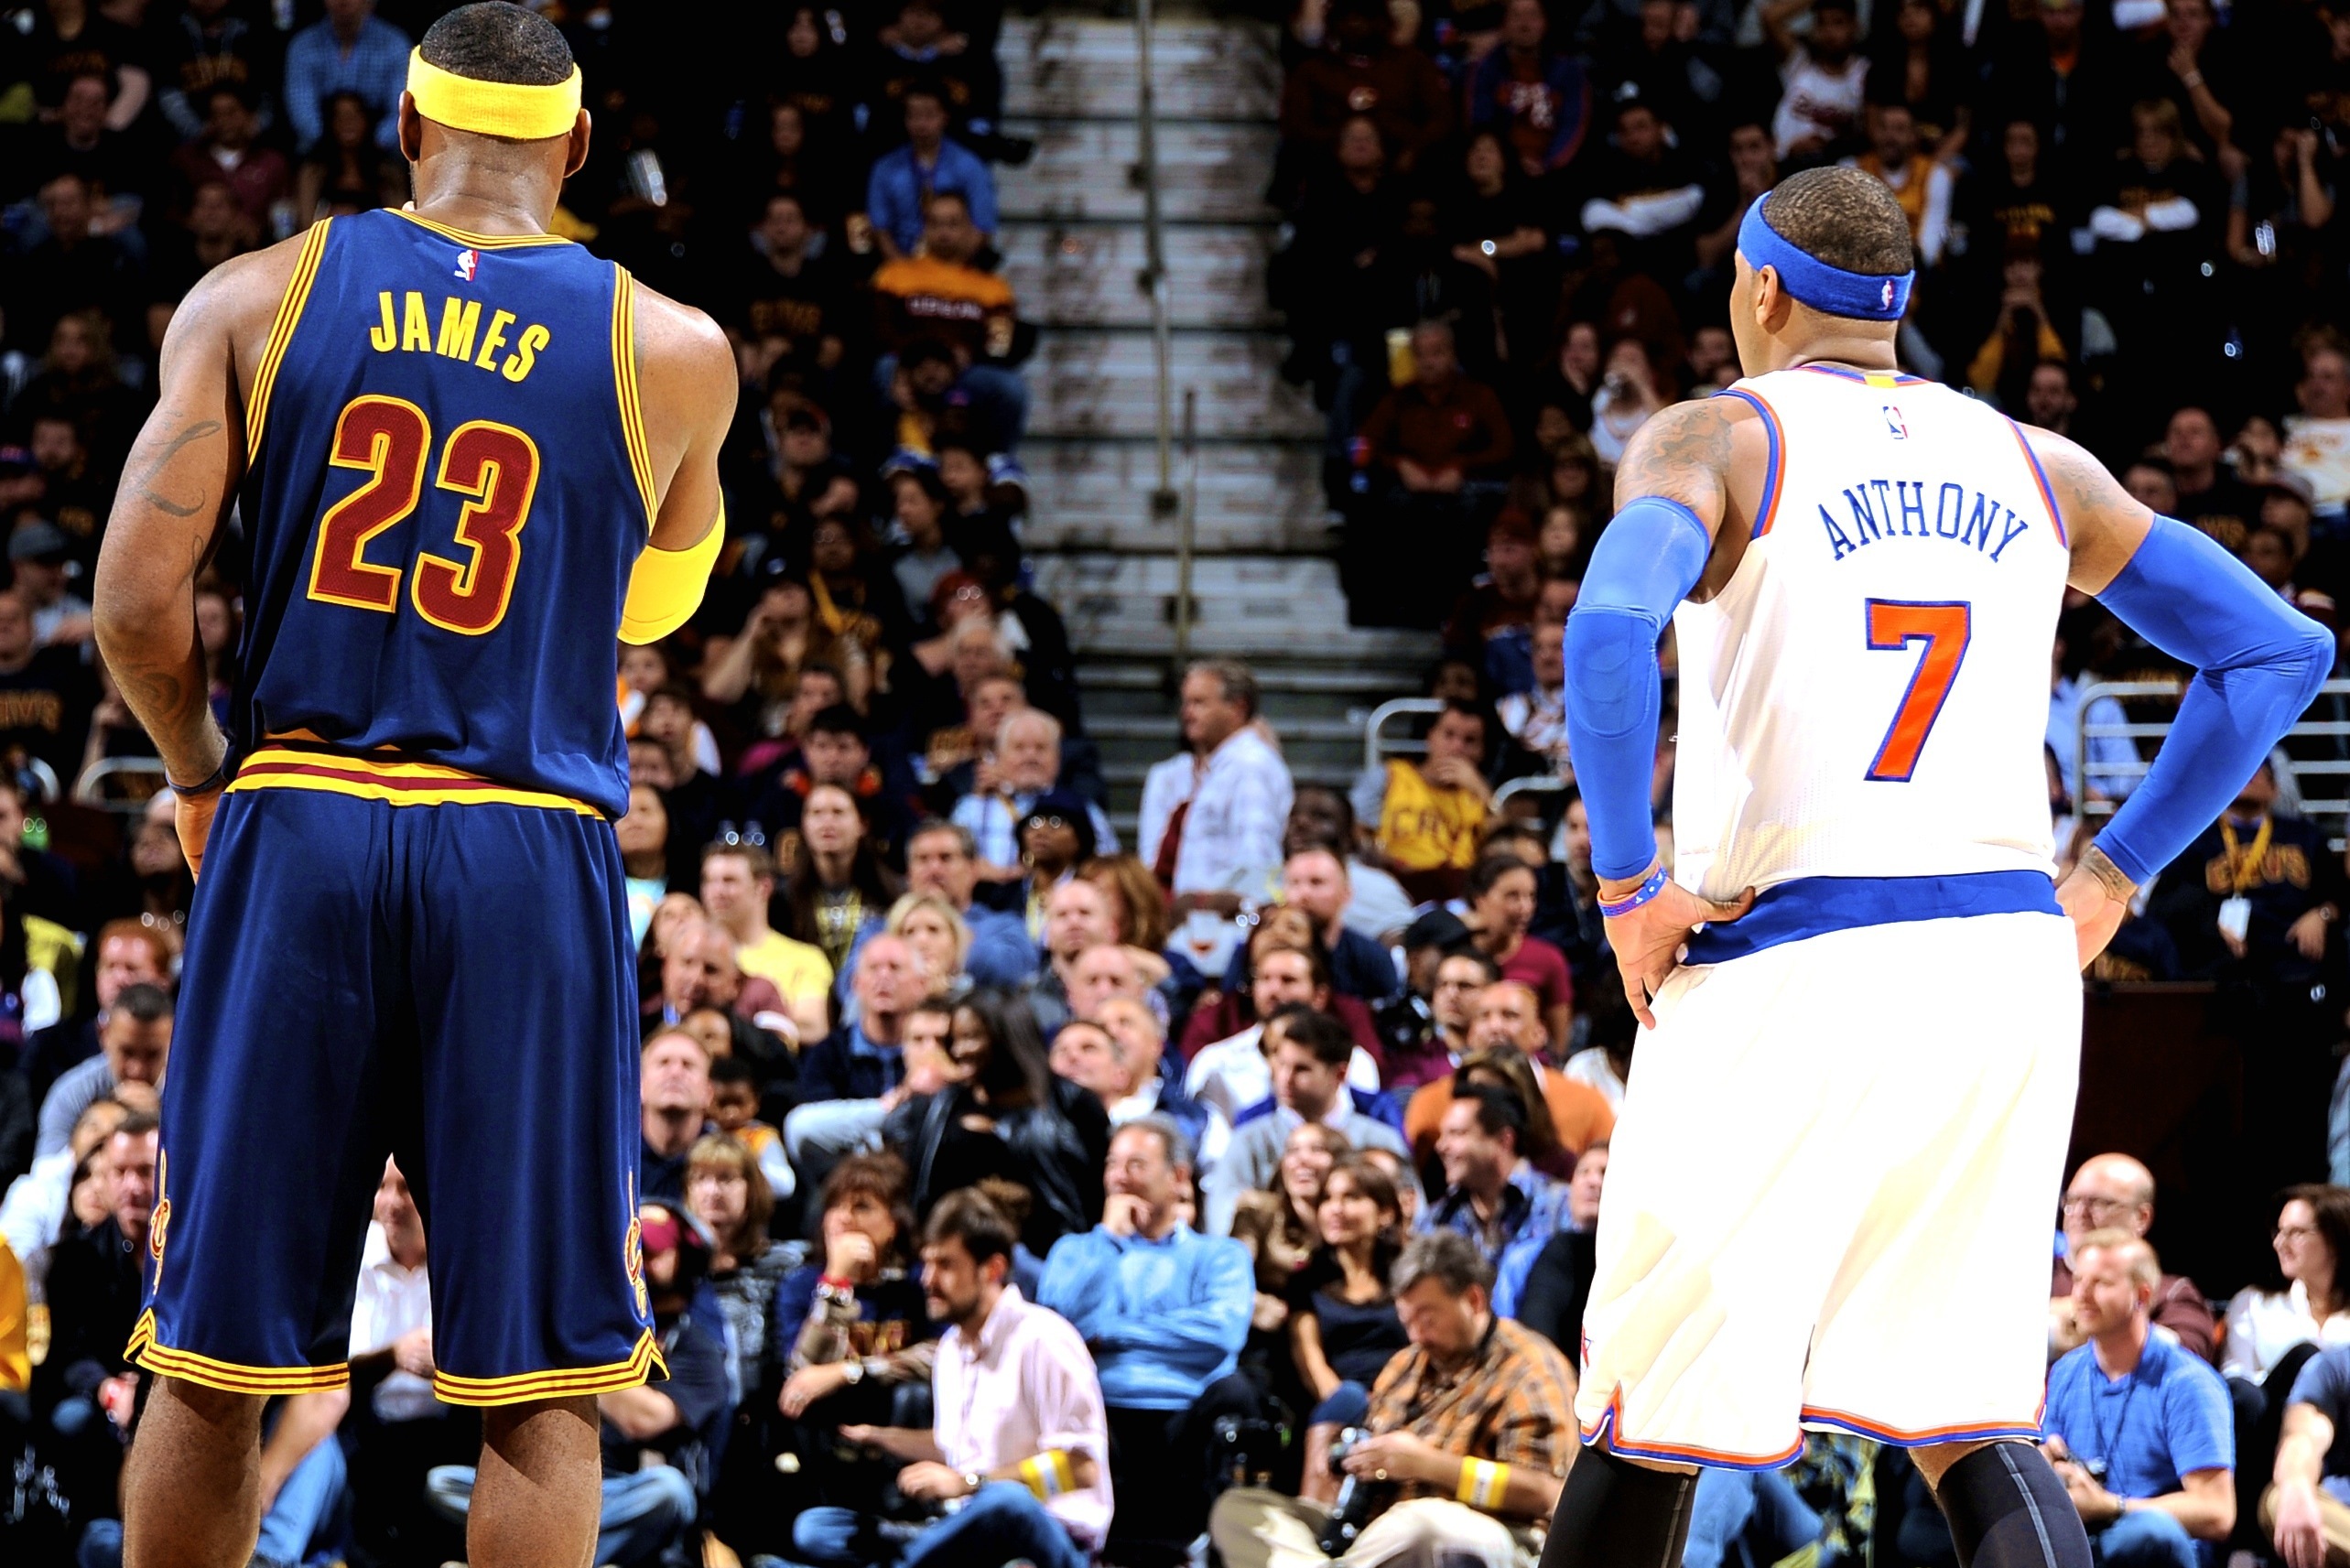 Cleveland Cavaliers vs. New York Knicks Live Score, Highlights and